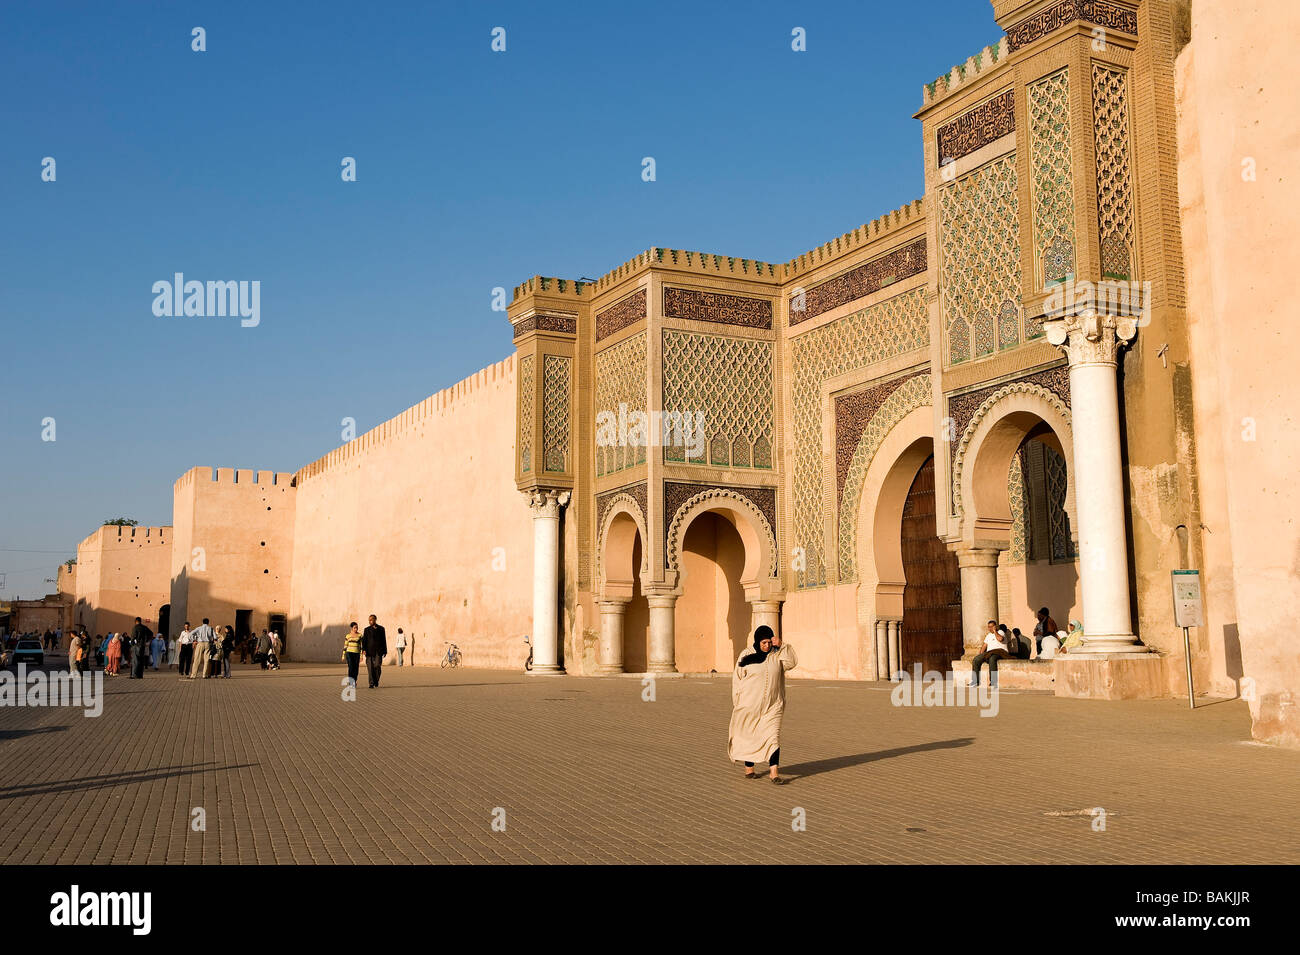 Morocco, Meknes Tafilalet Region, Meknes, Imperial City, medina listed as World Heritage by UNESCO, Bab El Mansour Gate between Stock Photo